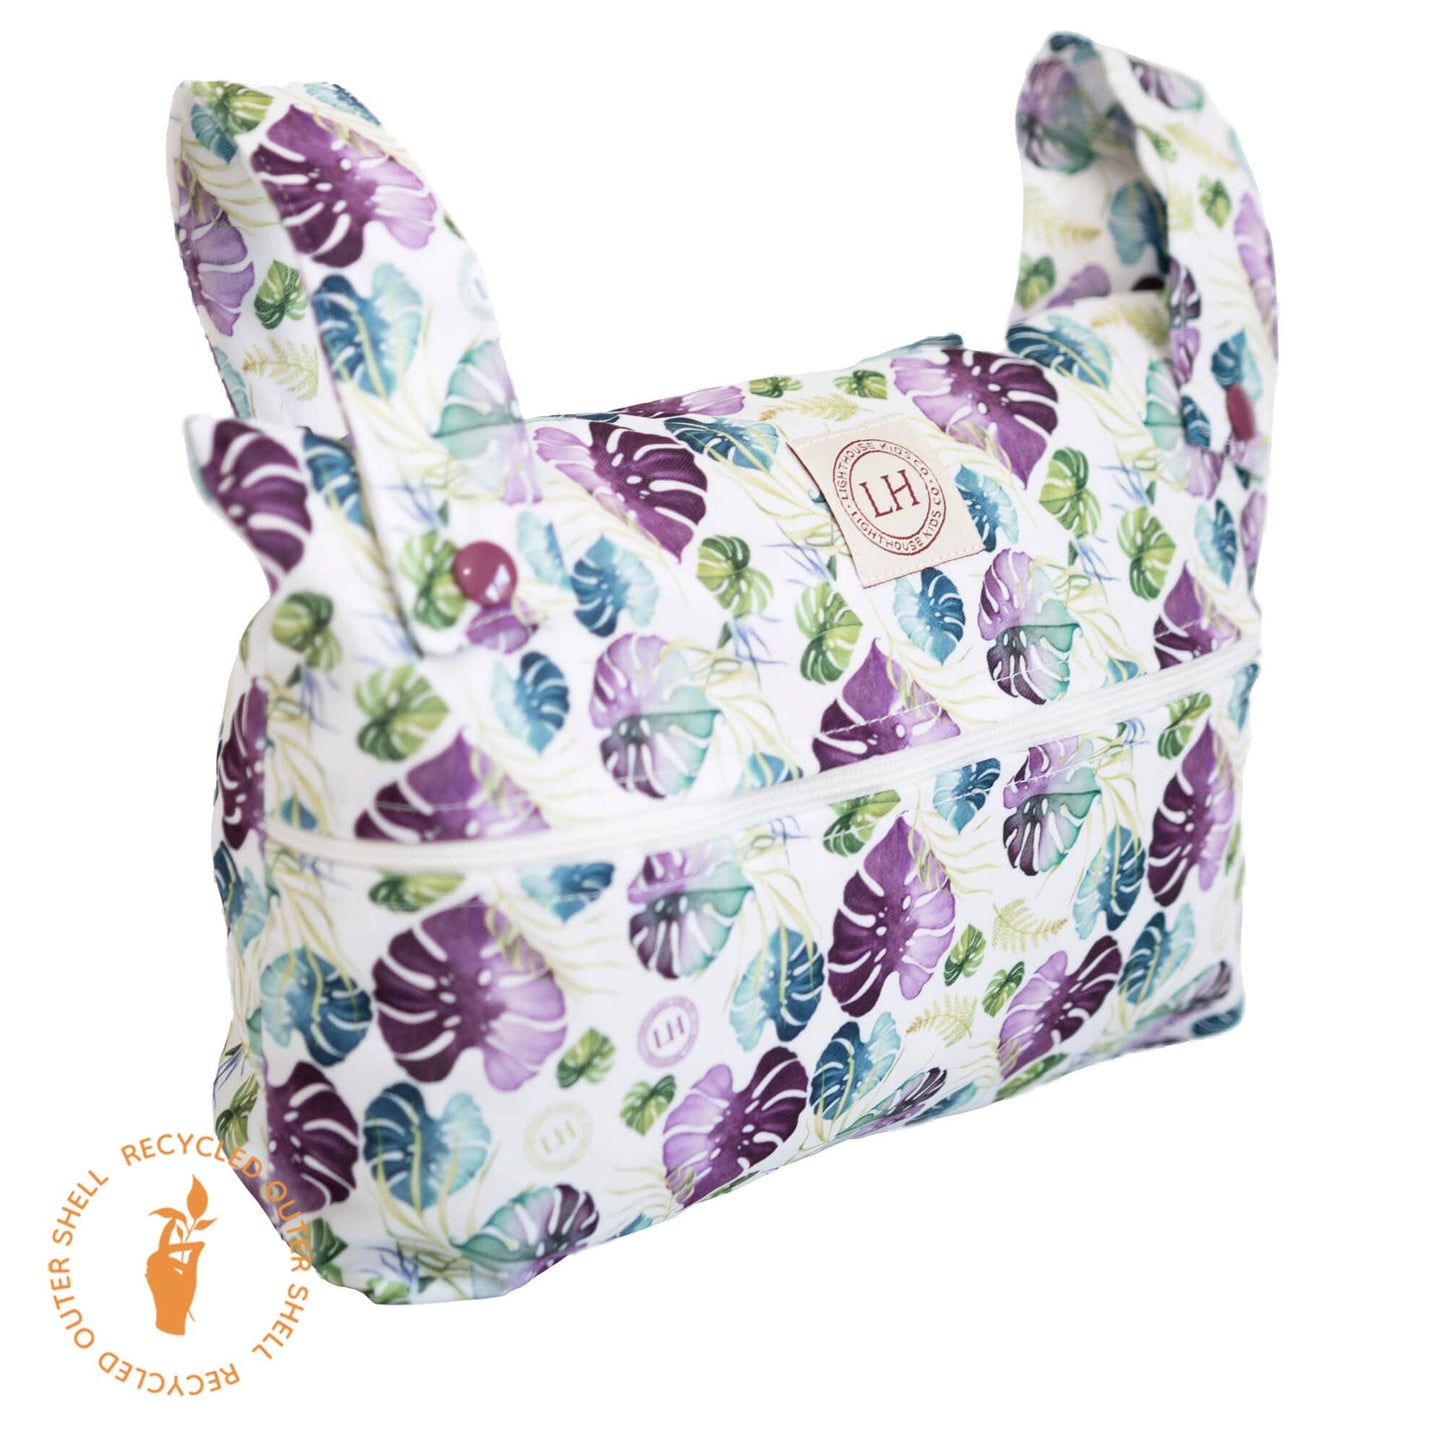 Lighthouse Kids Company | Cloth Diapers | Cloth Nappy - Small Wet Bag - Leaves